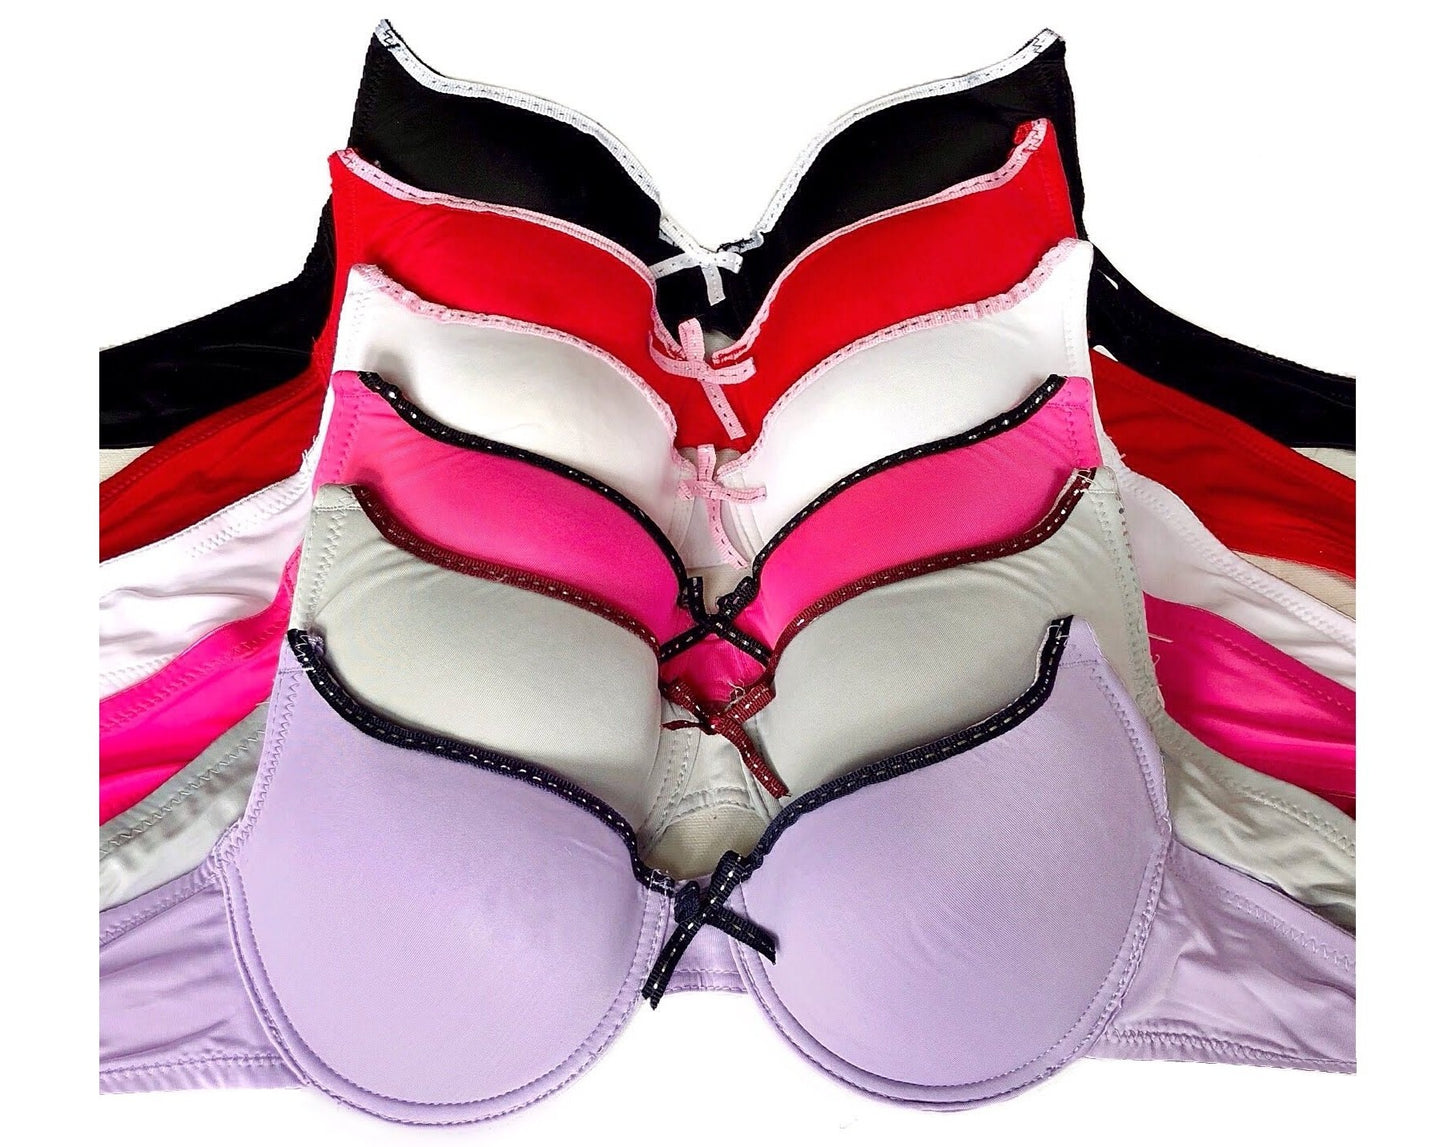 Gently Padded Smooth Contrast Bras